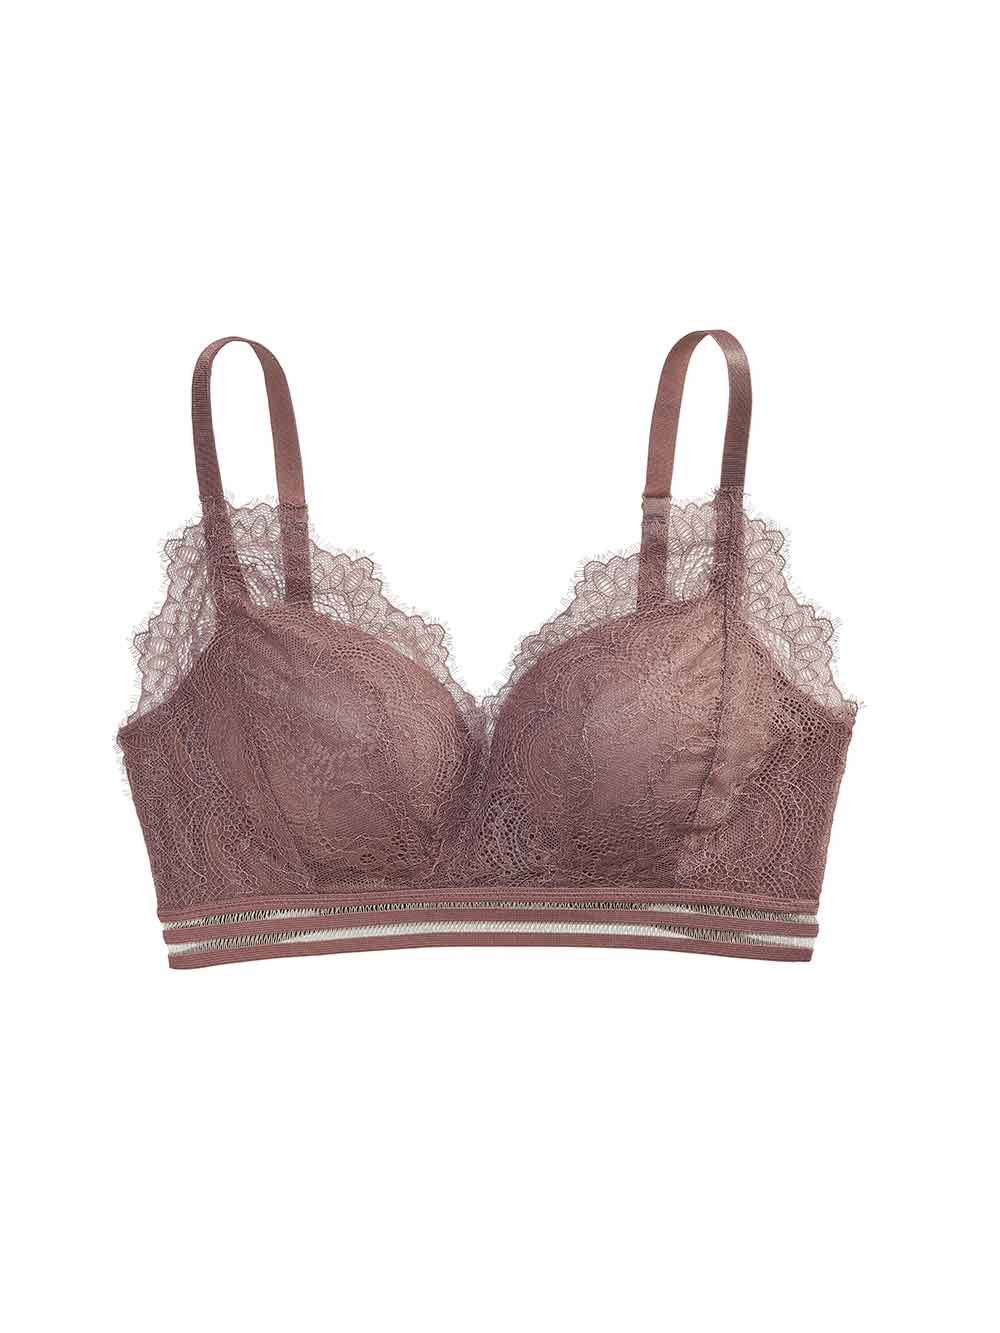 Lively Lace Padded No Wire Tera Cotta Bra 34 B NWT